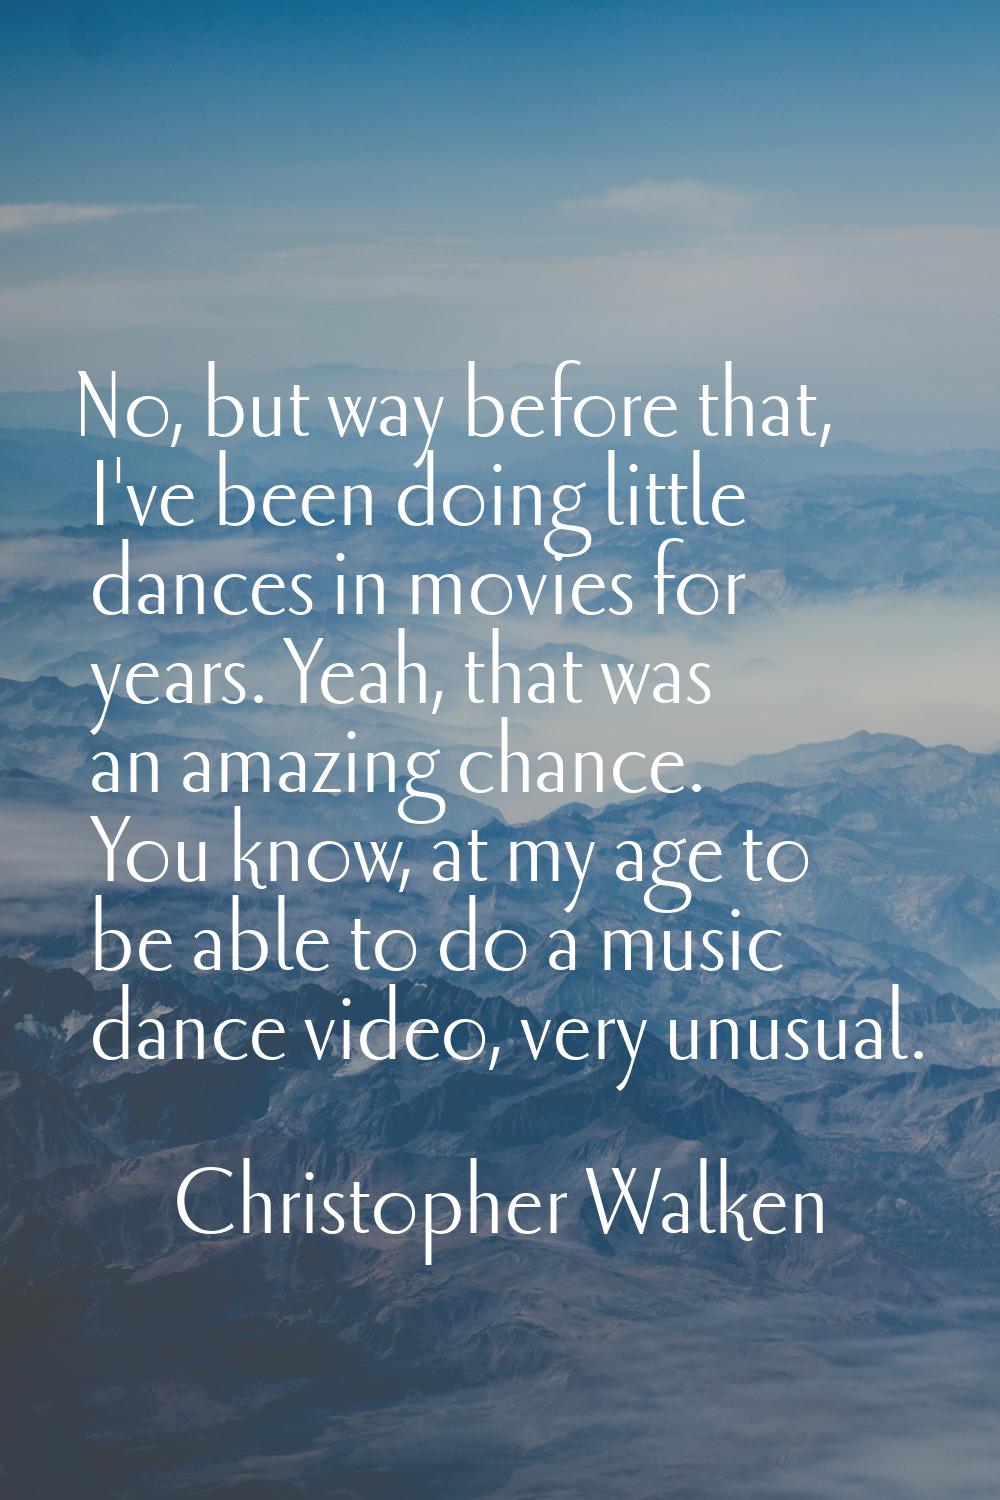 No, but way before that, I've been doing little dances in movies for years. Yeah, that was an amazi